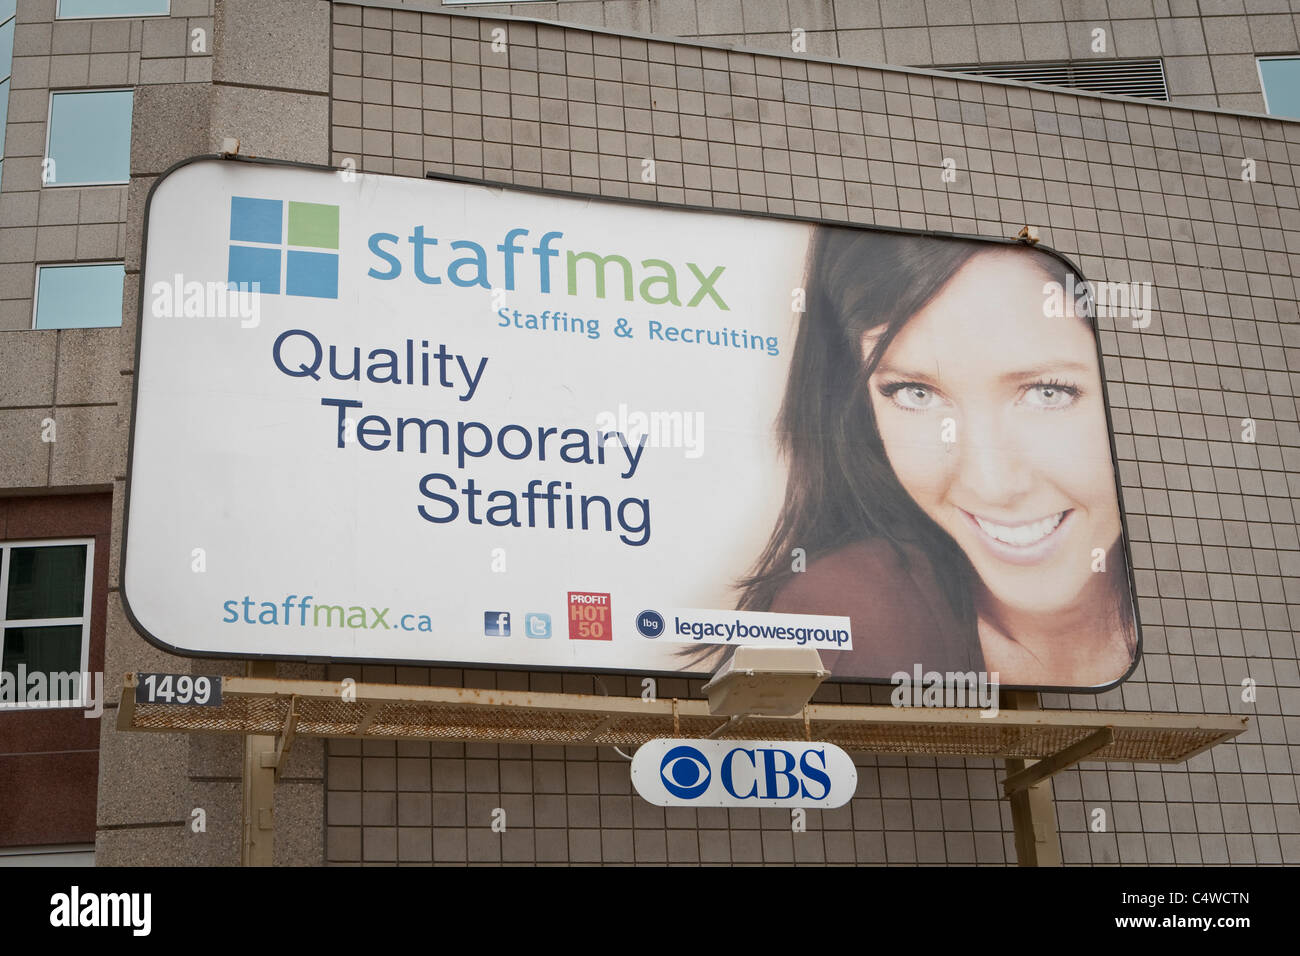 A Staffmax CBS advertisement board is seen in Winnipeg Monday May 23, 2011. Staffmax is a staffing and recruiting agency. Stock Photo